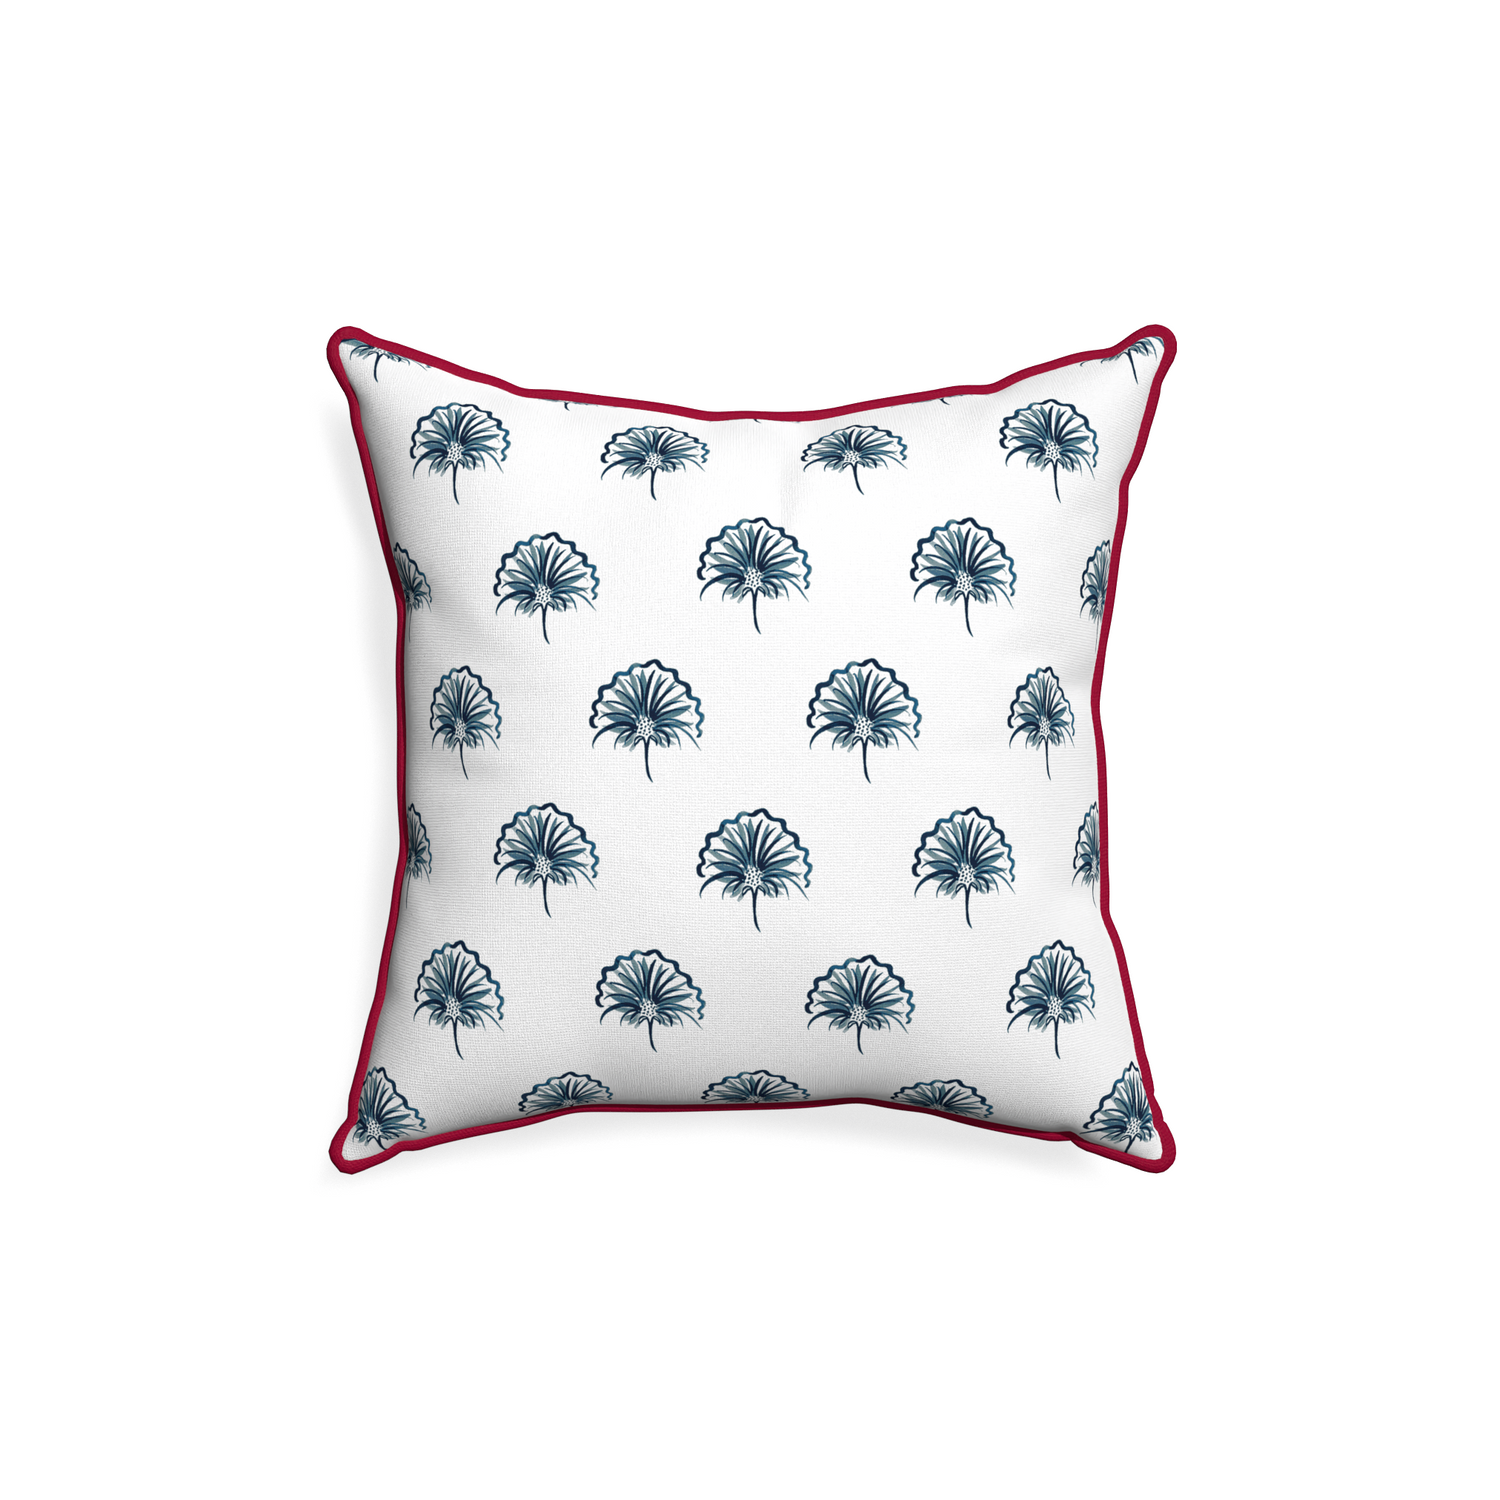 18-square penelope midnight custom floral navypillow with raspberry piping on white background